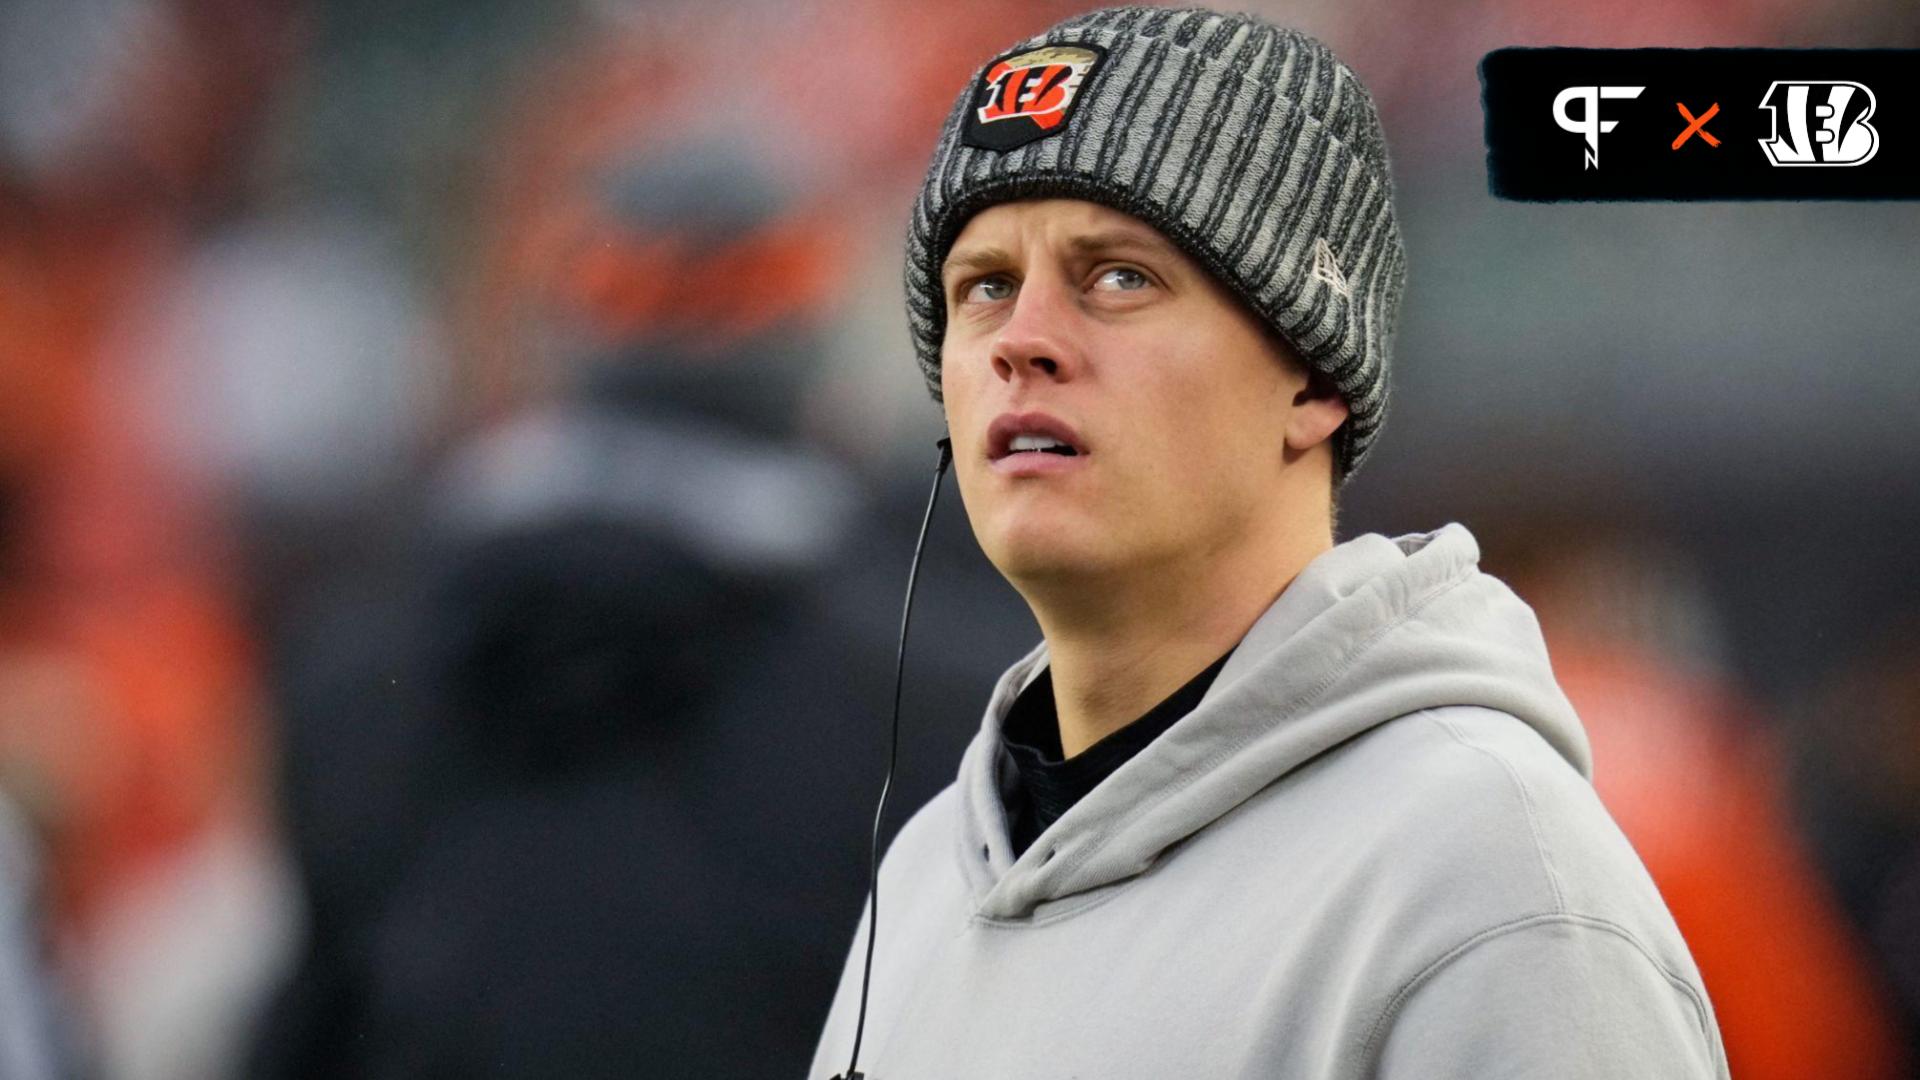 Joe Burrow (9) walks the sideline in the fourth quarter of the NFL Week 12 game between the Cincinnati Bengals and the Pittsburgh Steelers at Paycor Stadium.